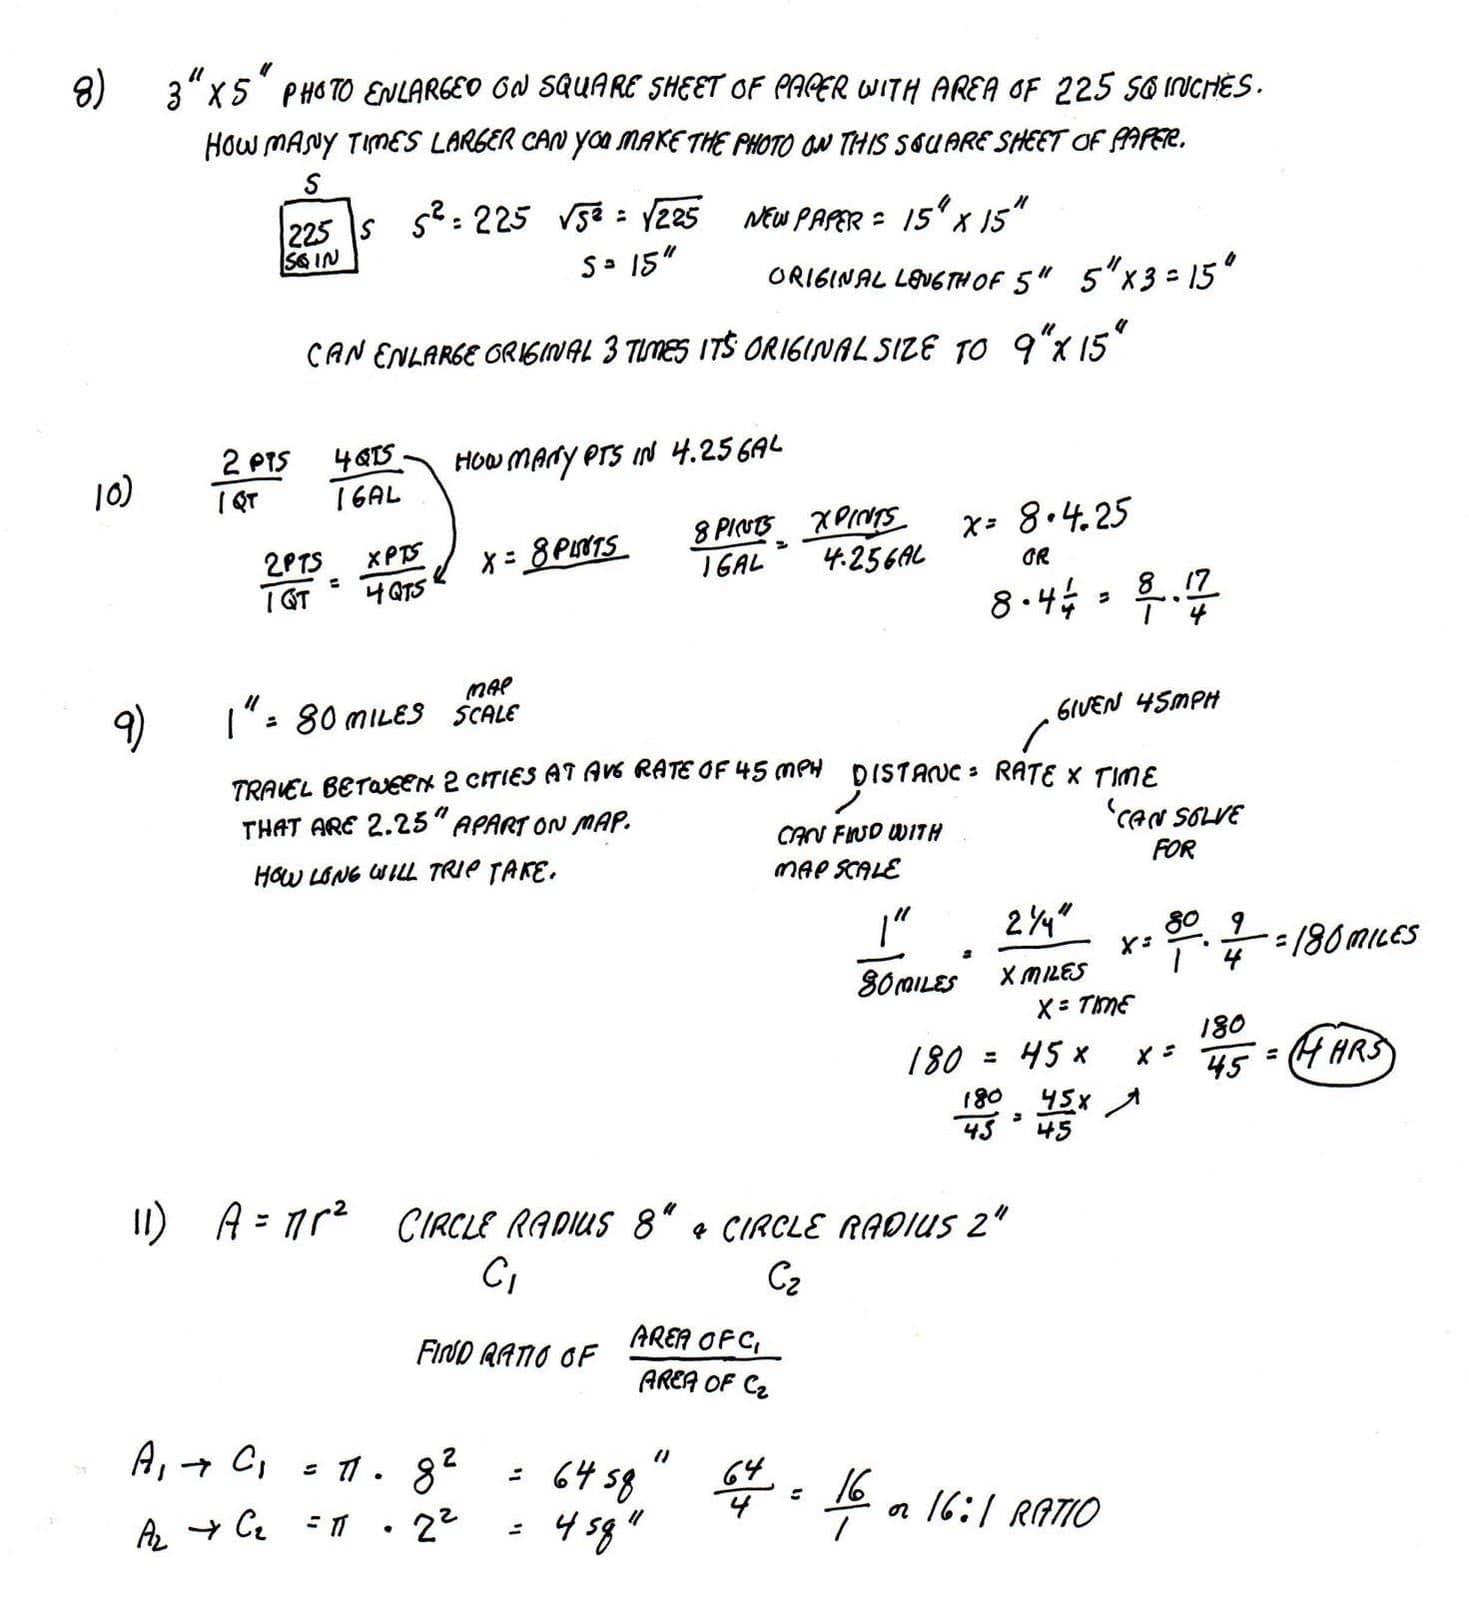 Cobb Adult Ed Math: Solutions to May 26 Ratio and Proportion Problems